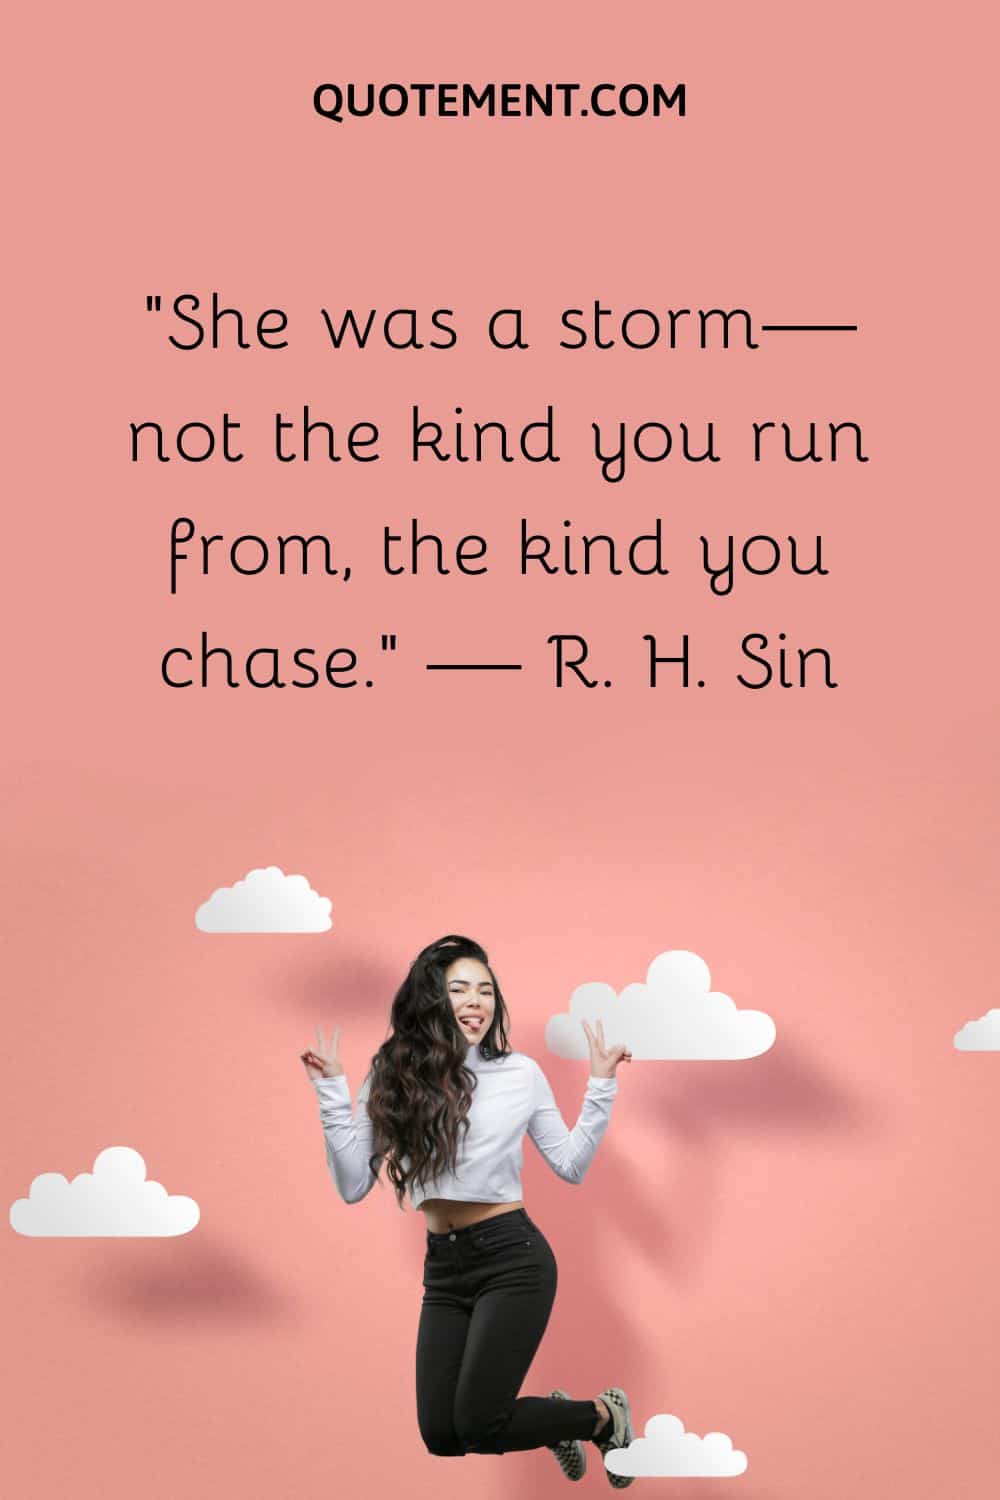 She was a storm—not the kind you run from, the kind you chase.